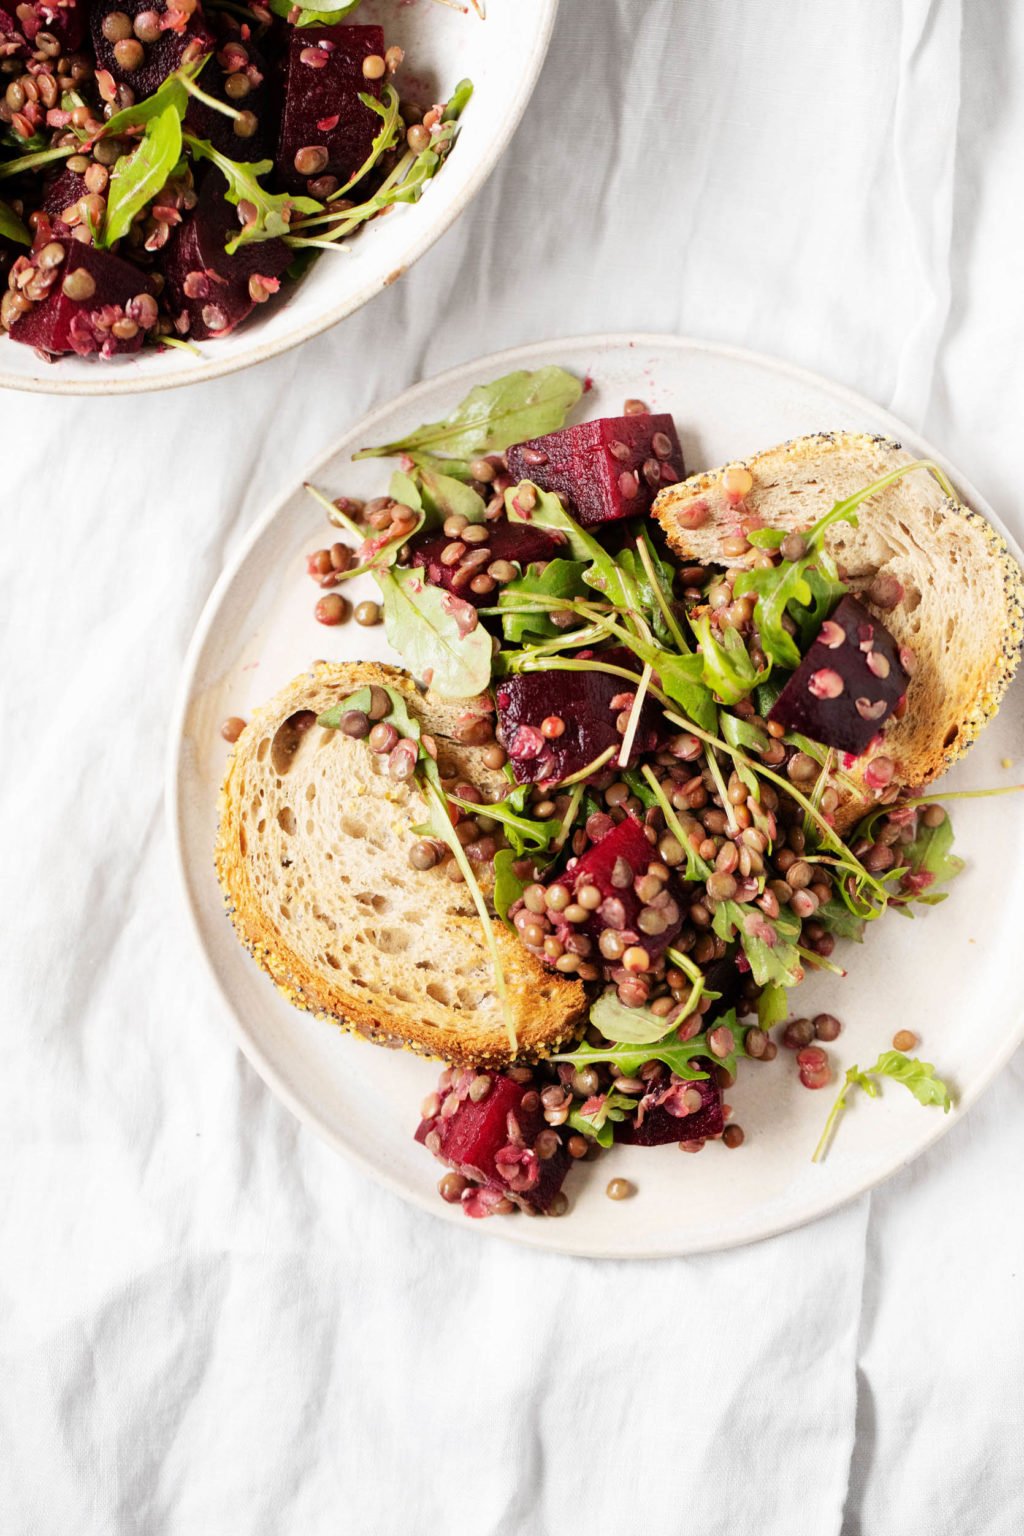 An overhead image of a slice of bread that's been piled with lentils, beets, and arugula.